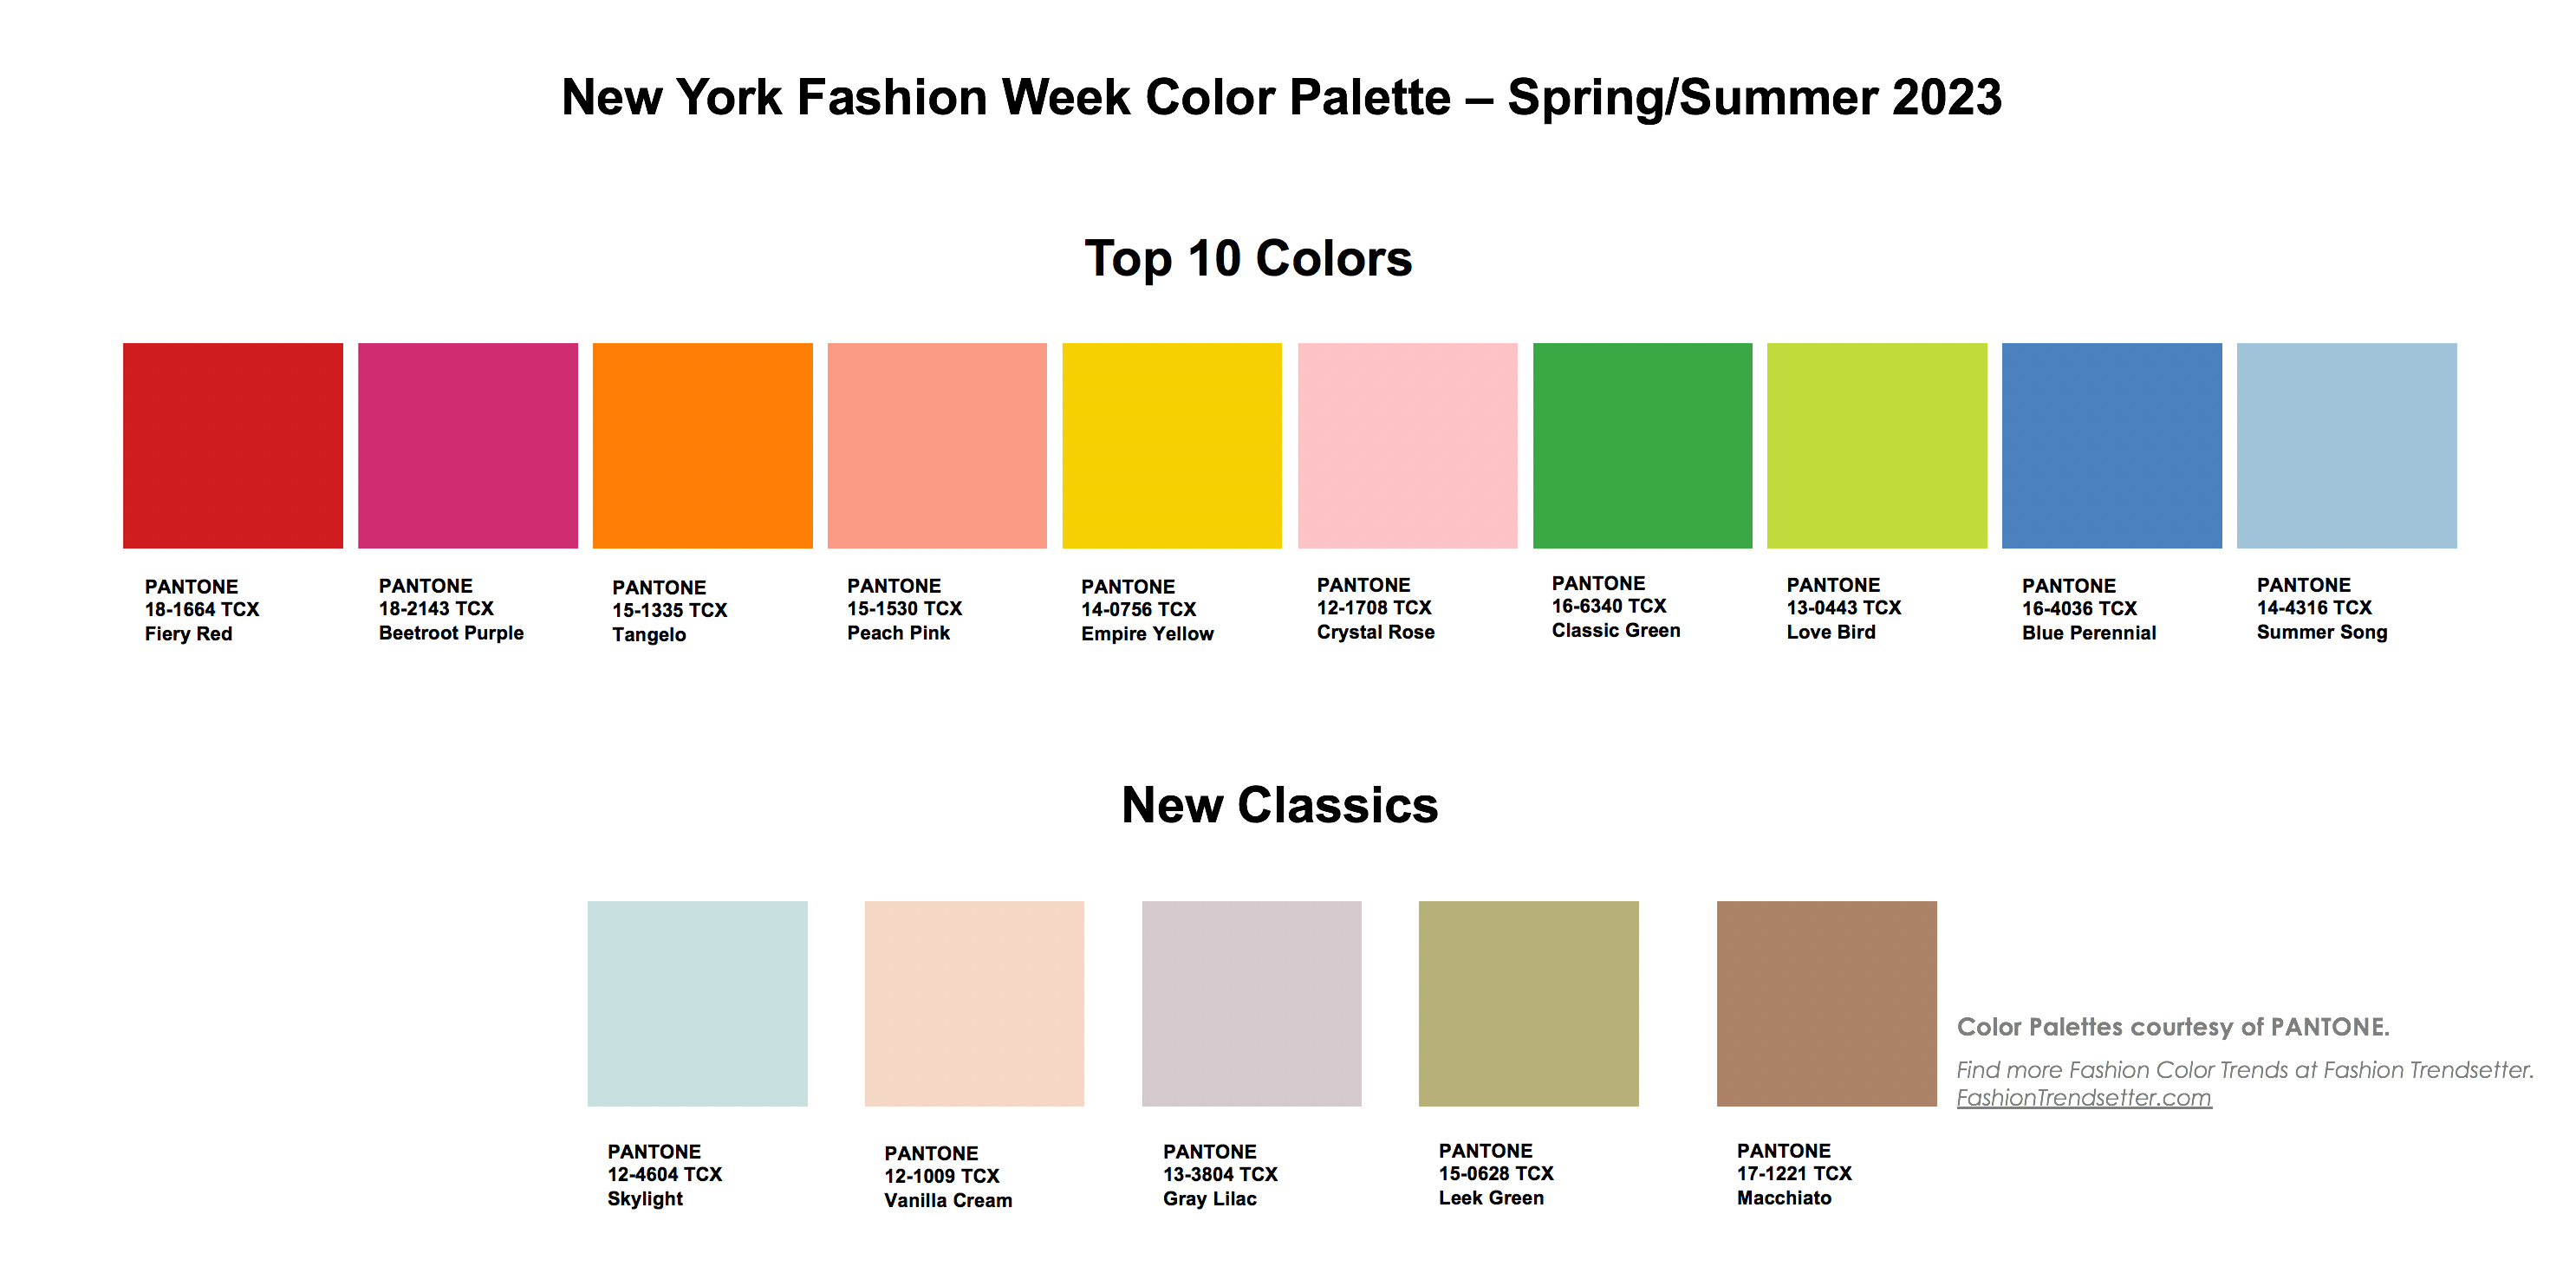 Pantone Fashion Color Trend Report Spring/Summer 2023 For New York